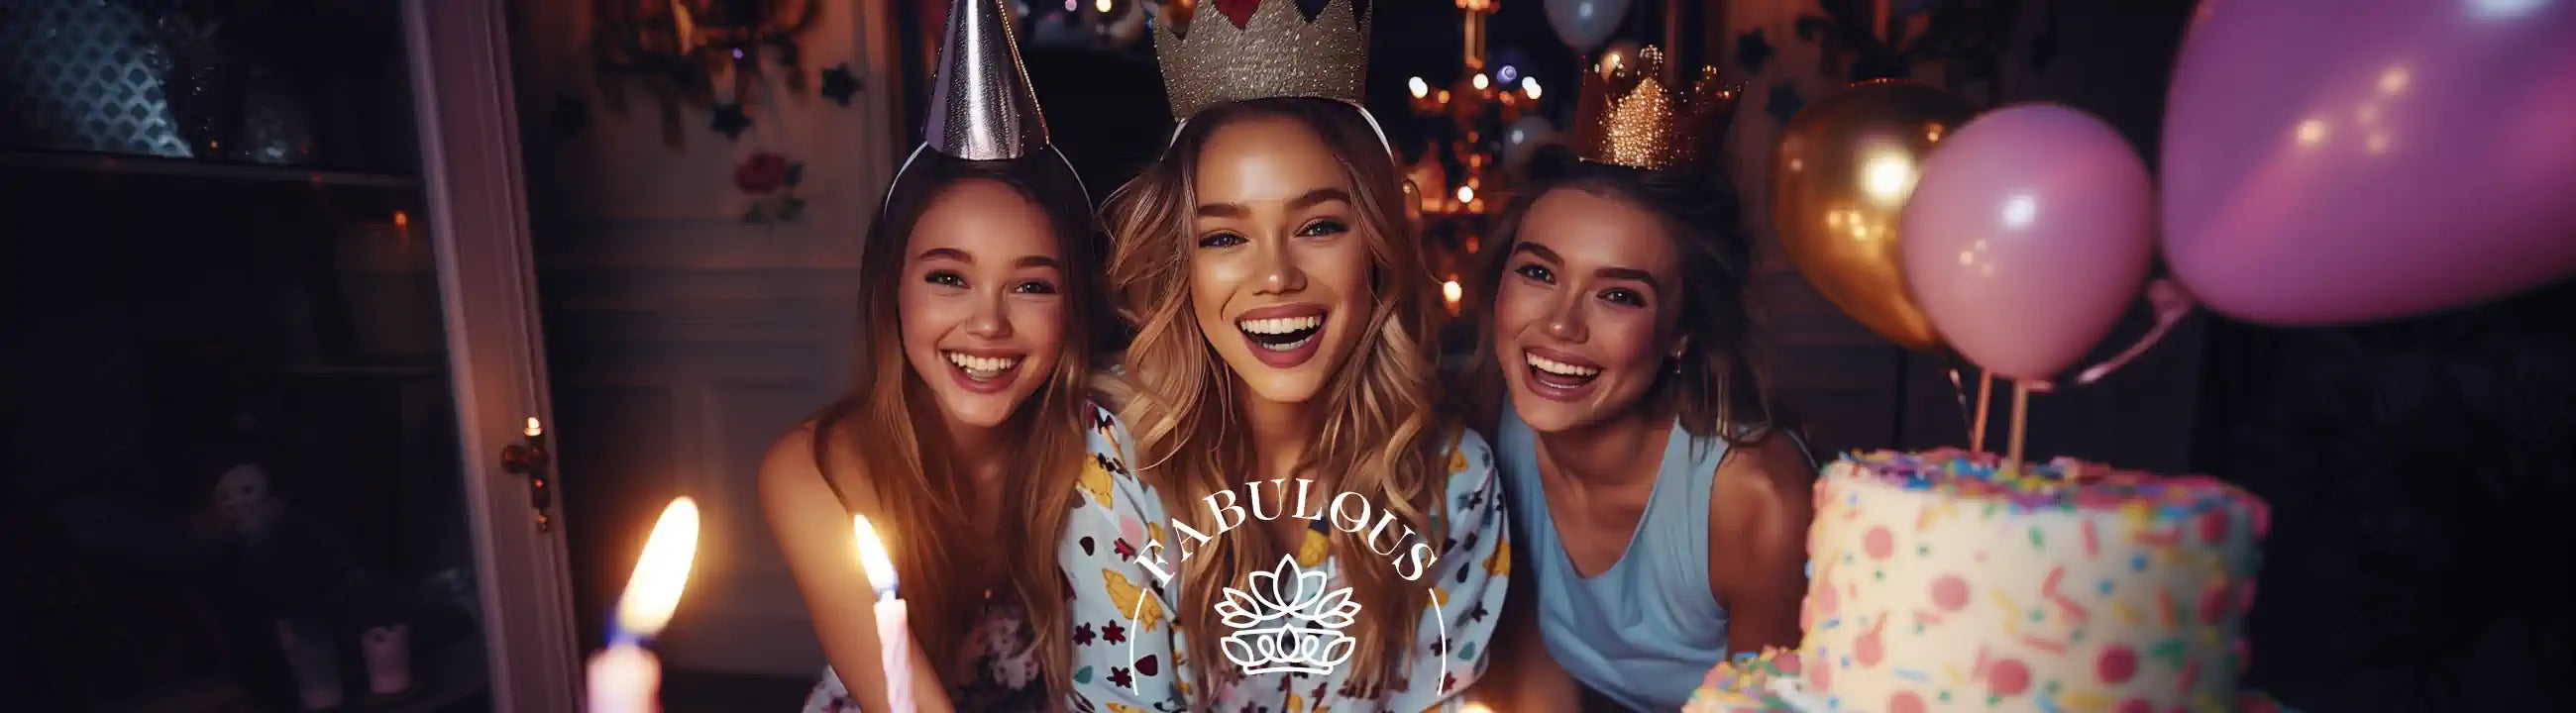 Three cheerful young women wearing party hats and smiling while celebrating a birthday together with candles and a cake, from Fabulous Flowers and Gifts.